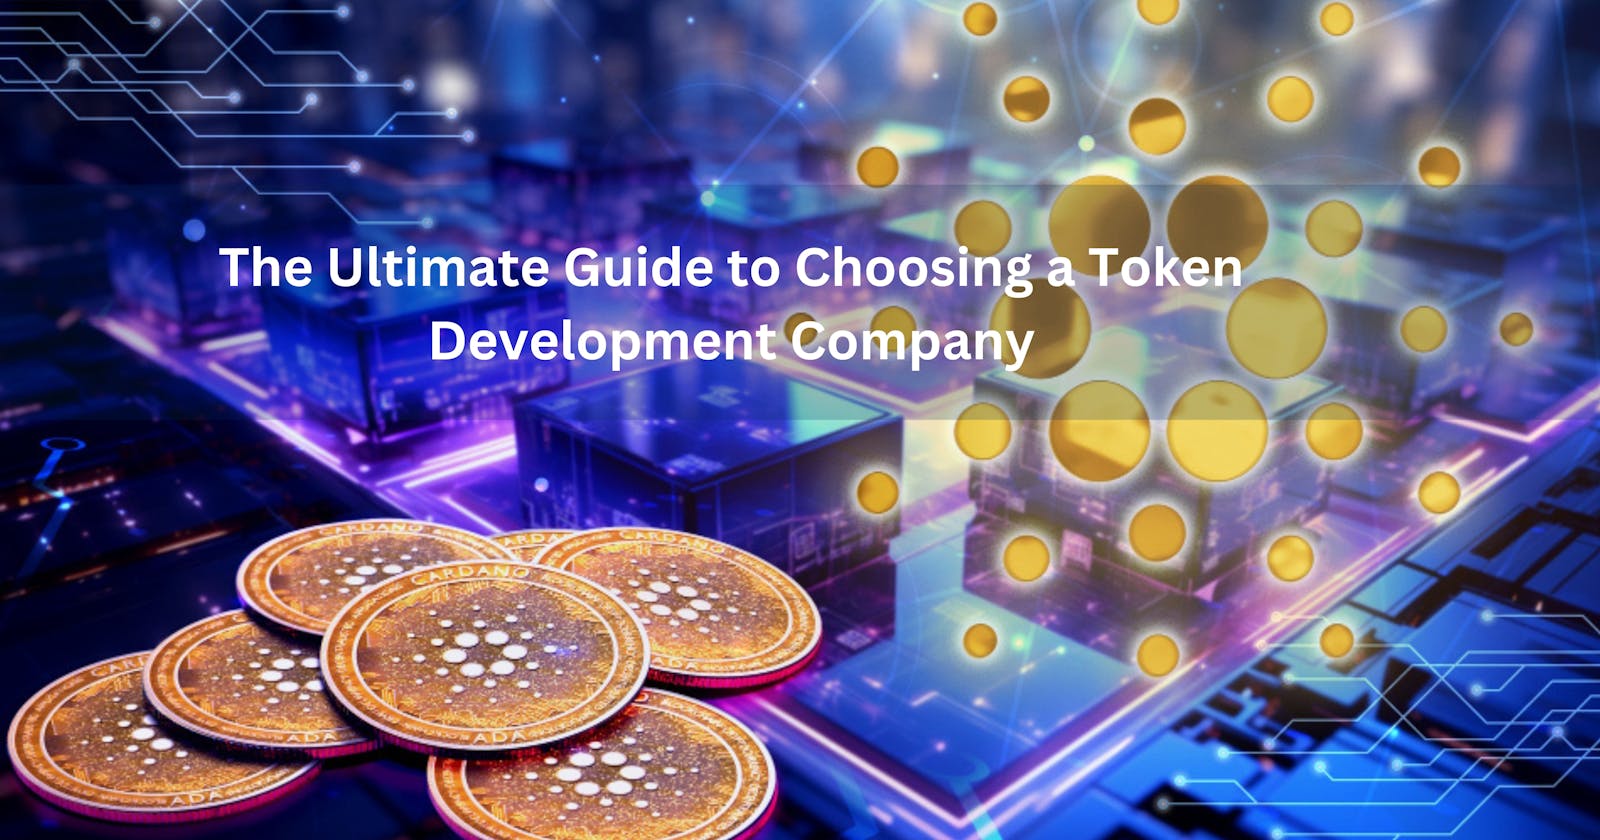 The Ultimate Guide to Choosing a Token Development Company